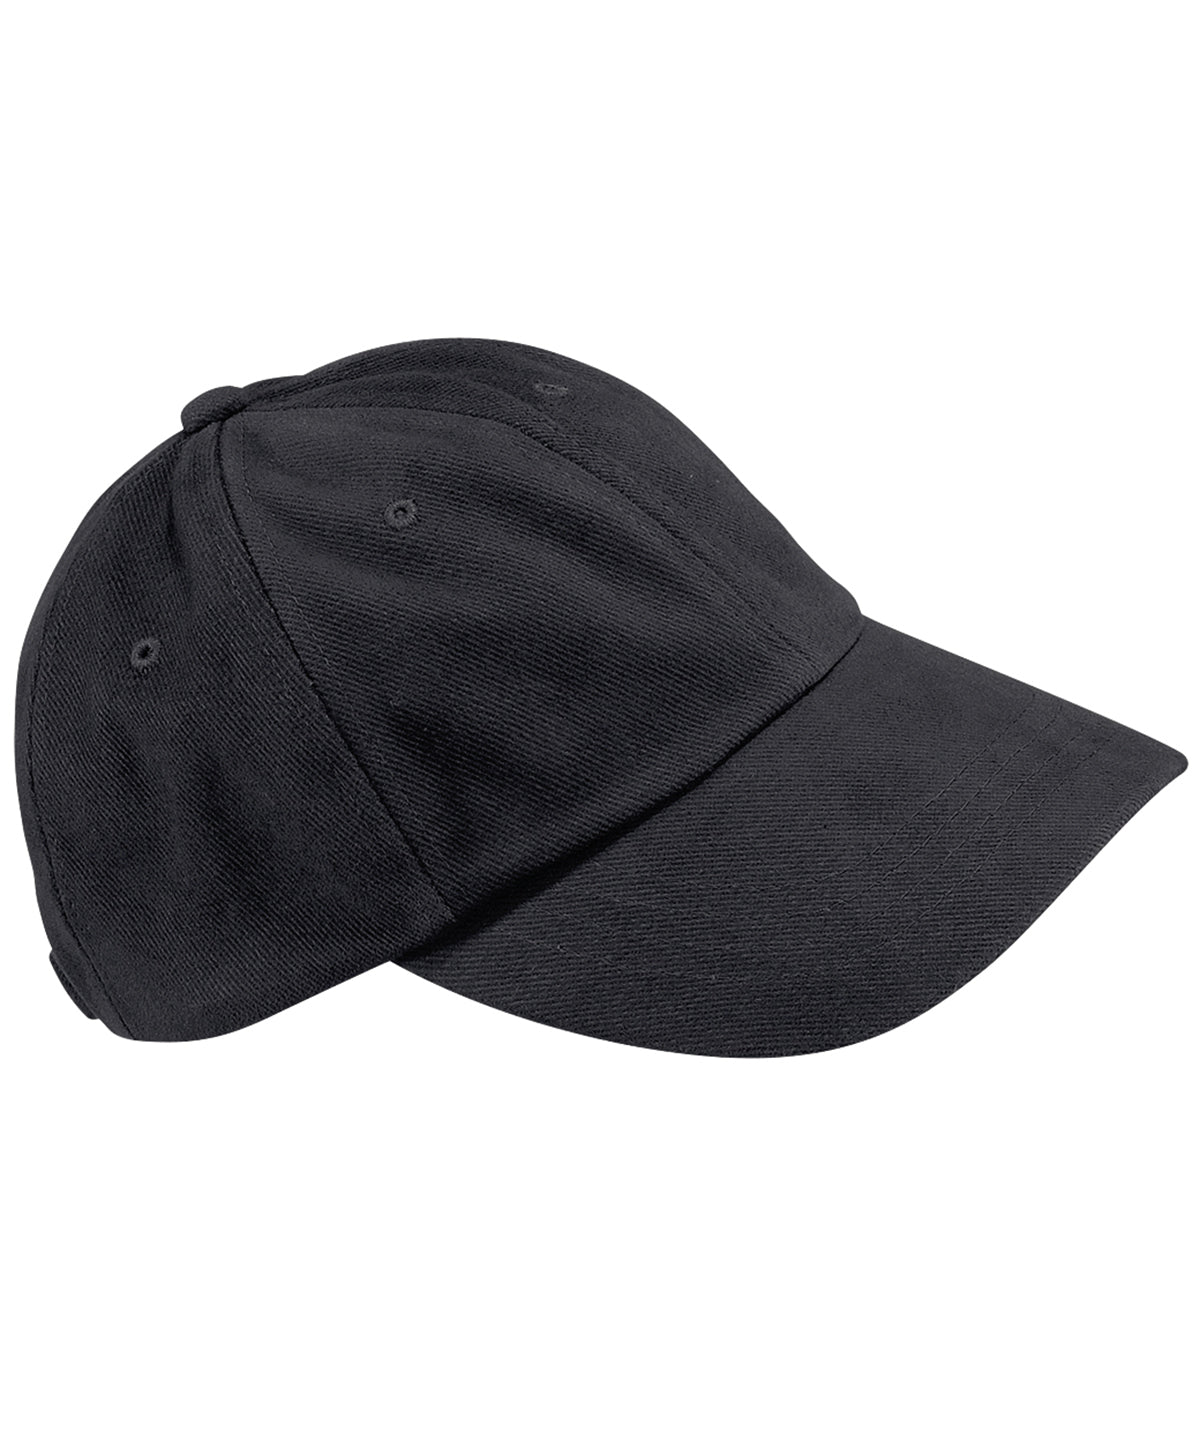 Personalised Caps - Black Beechfield Low-profile heavy brushed cotton cap